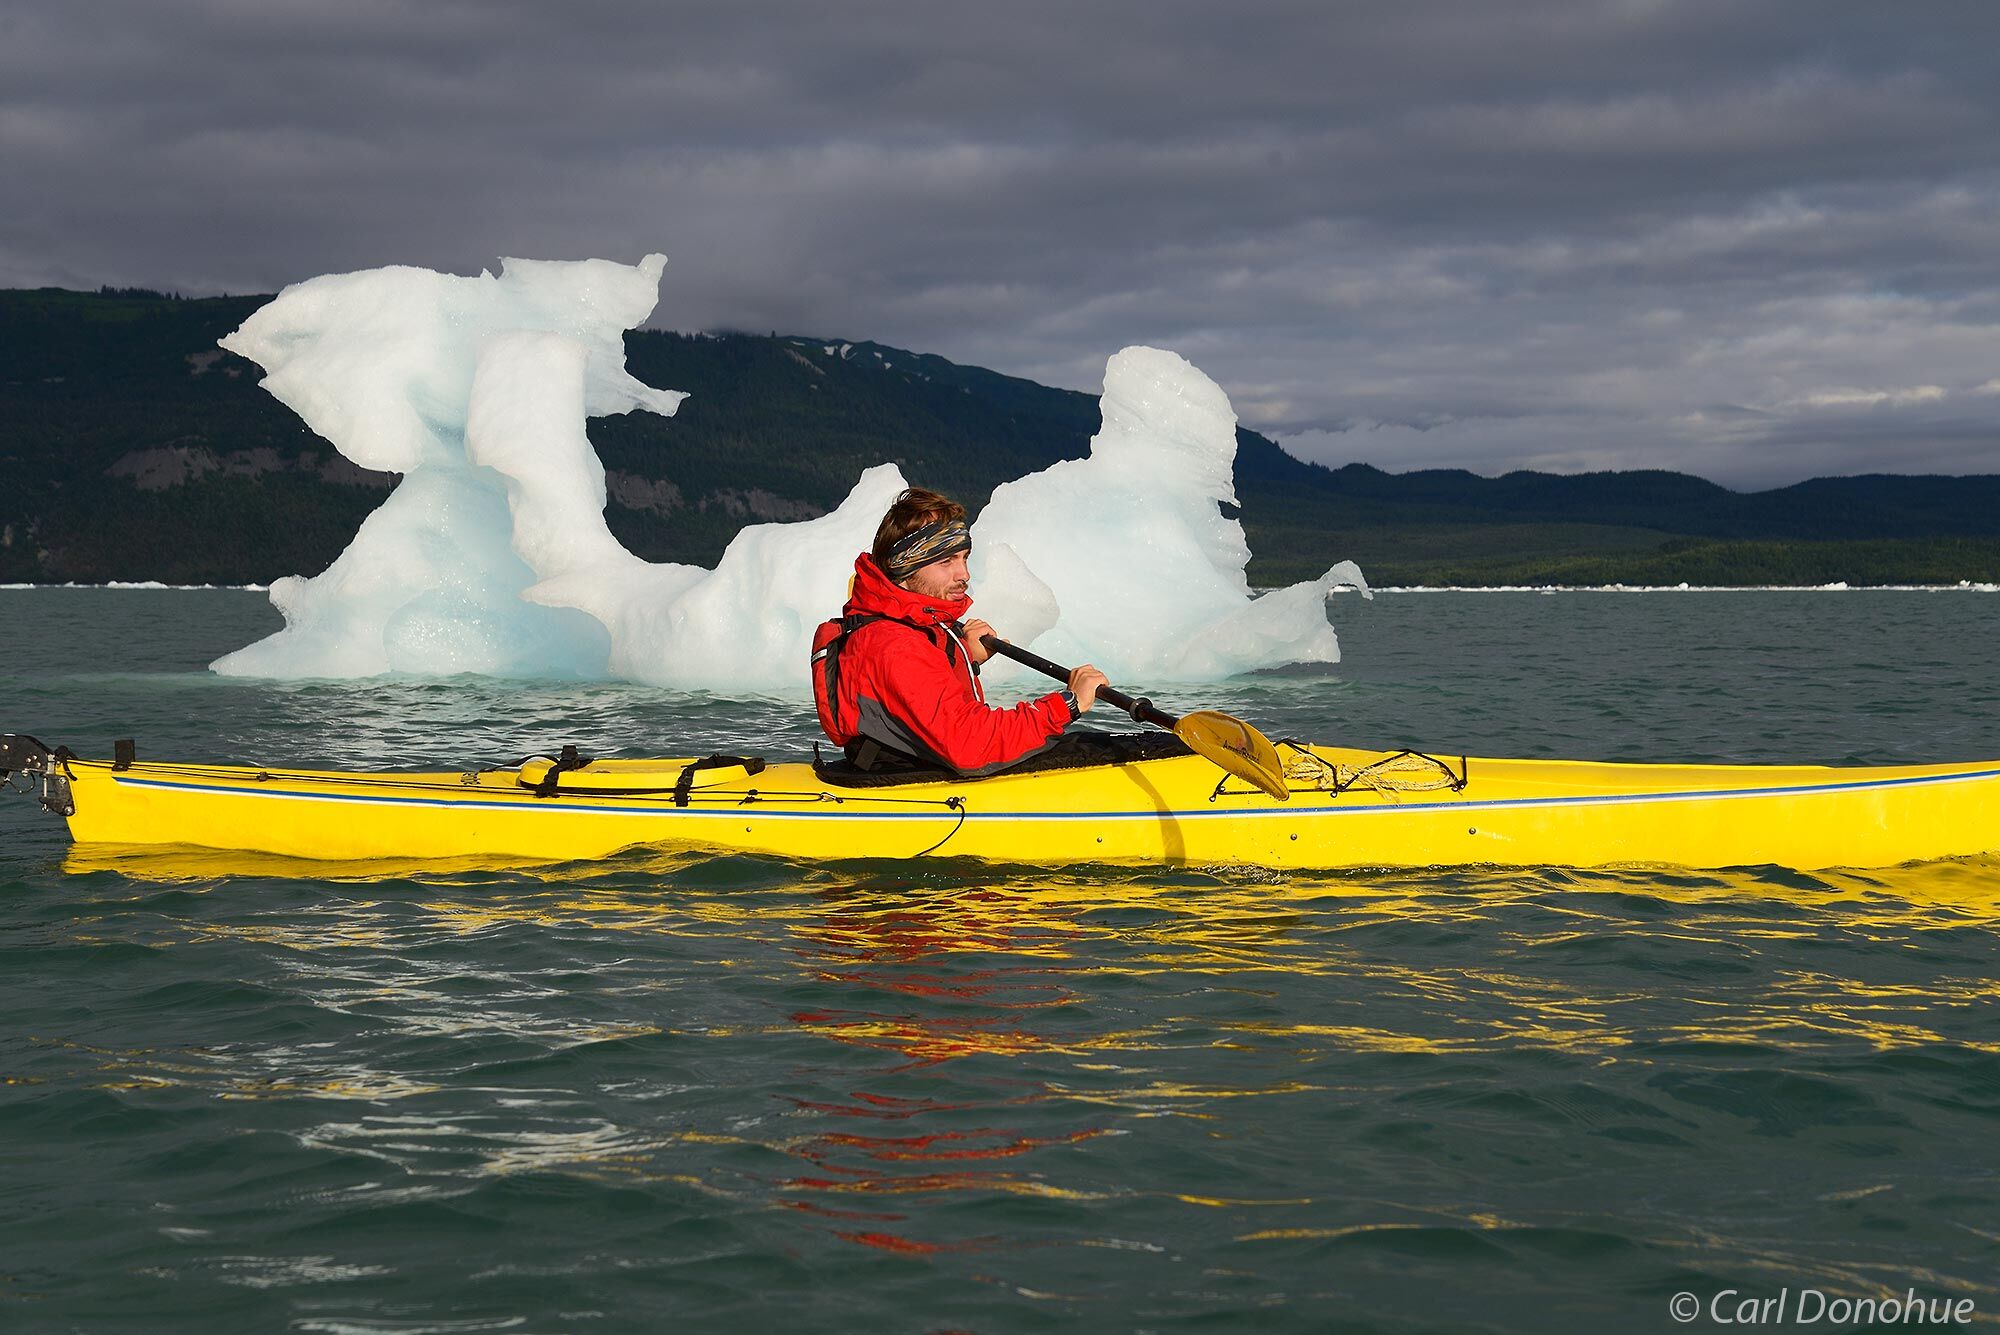 A stock photo of a young man sea kayaking past a large iceberg in Icy Bay, with icebergs floating in the background as he paddles...